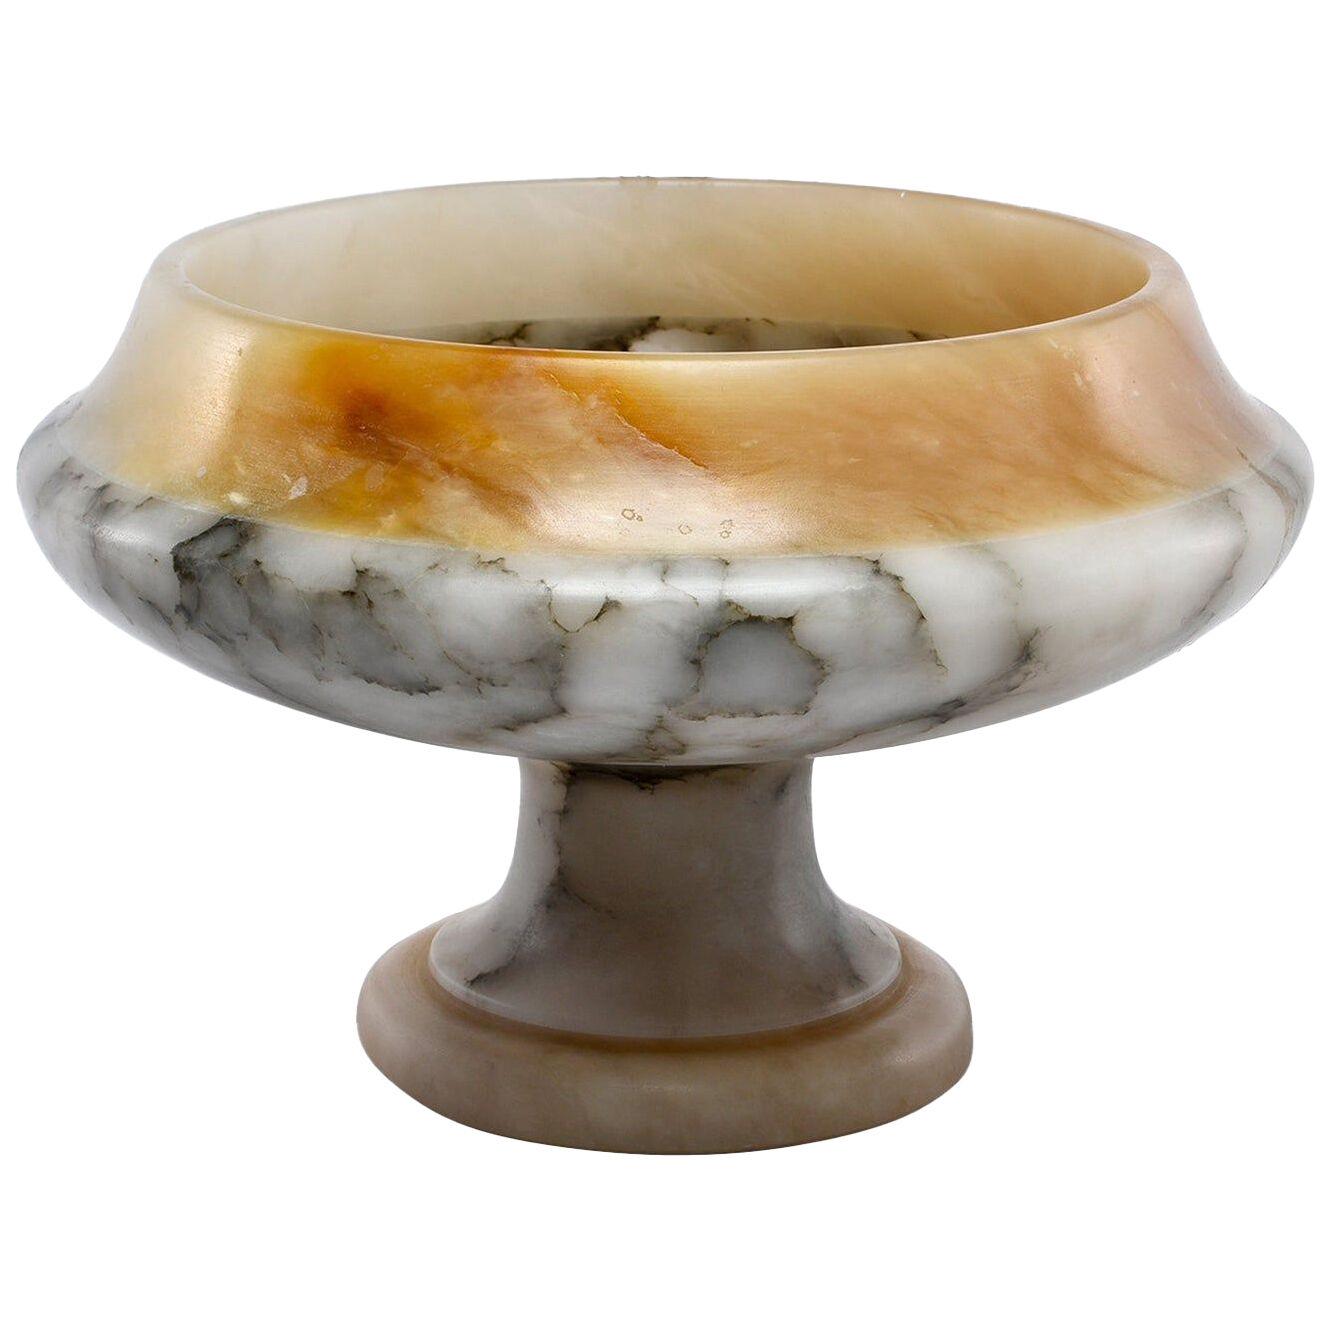 Bardiglio Marble and Alabaster Pedestal Bowl or Compote